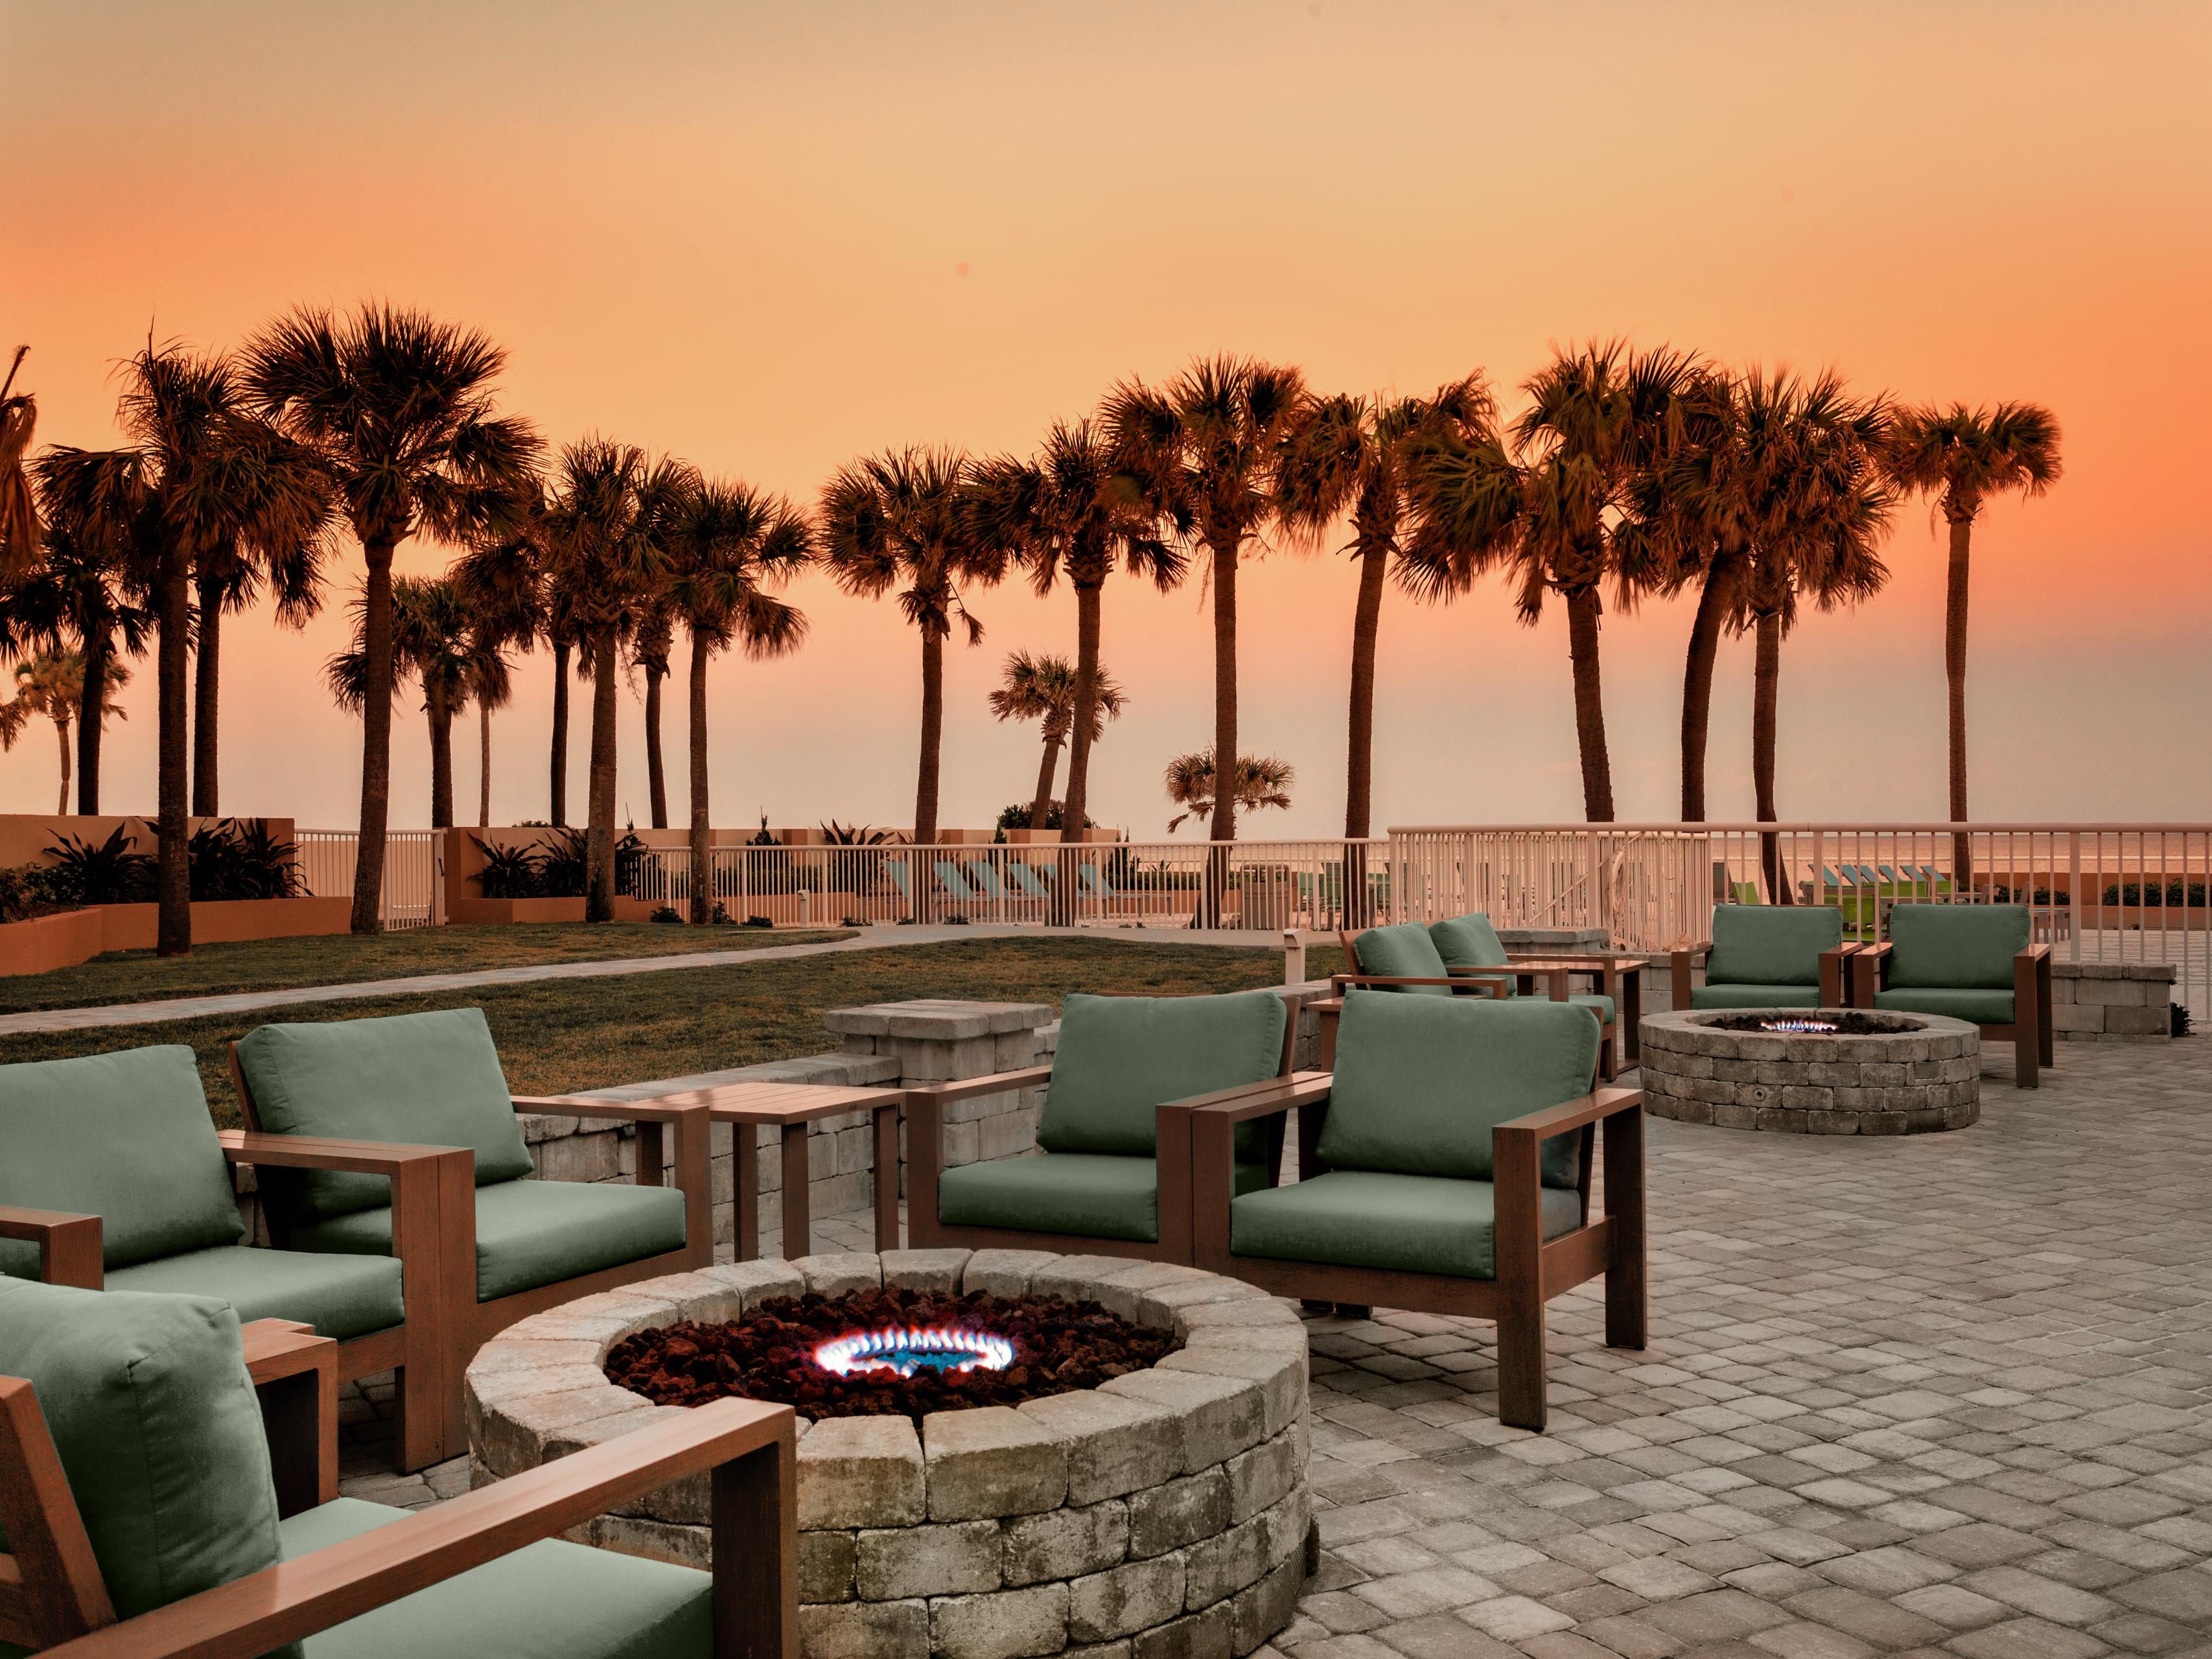 Enjoy a relaxing evening hanging out by our complimentary fire pits on the beach with a fruity beverage from our bar in hand! 